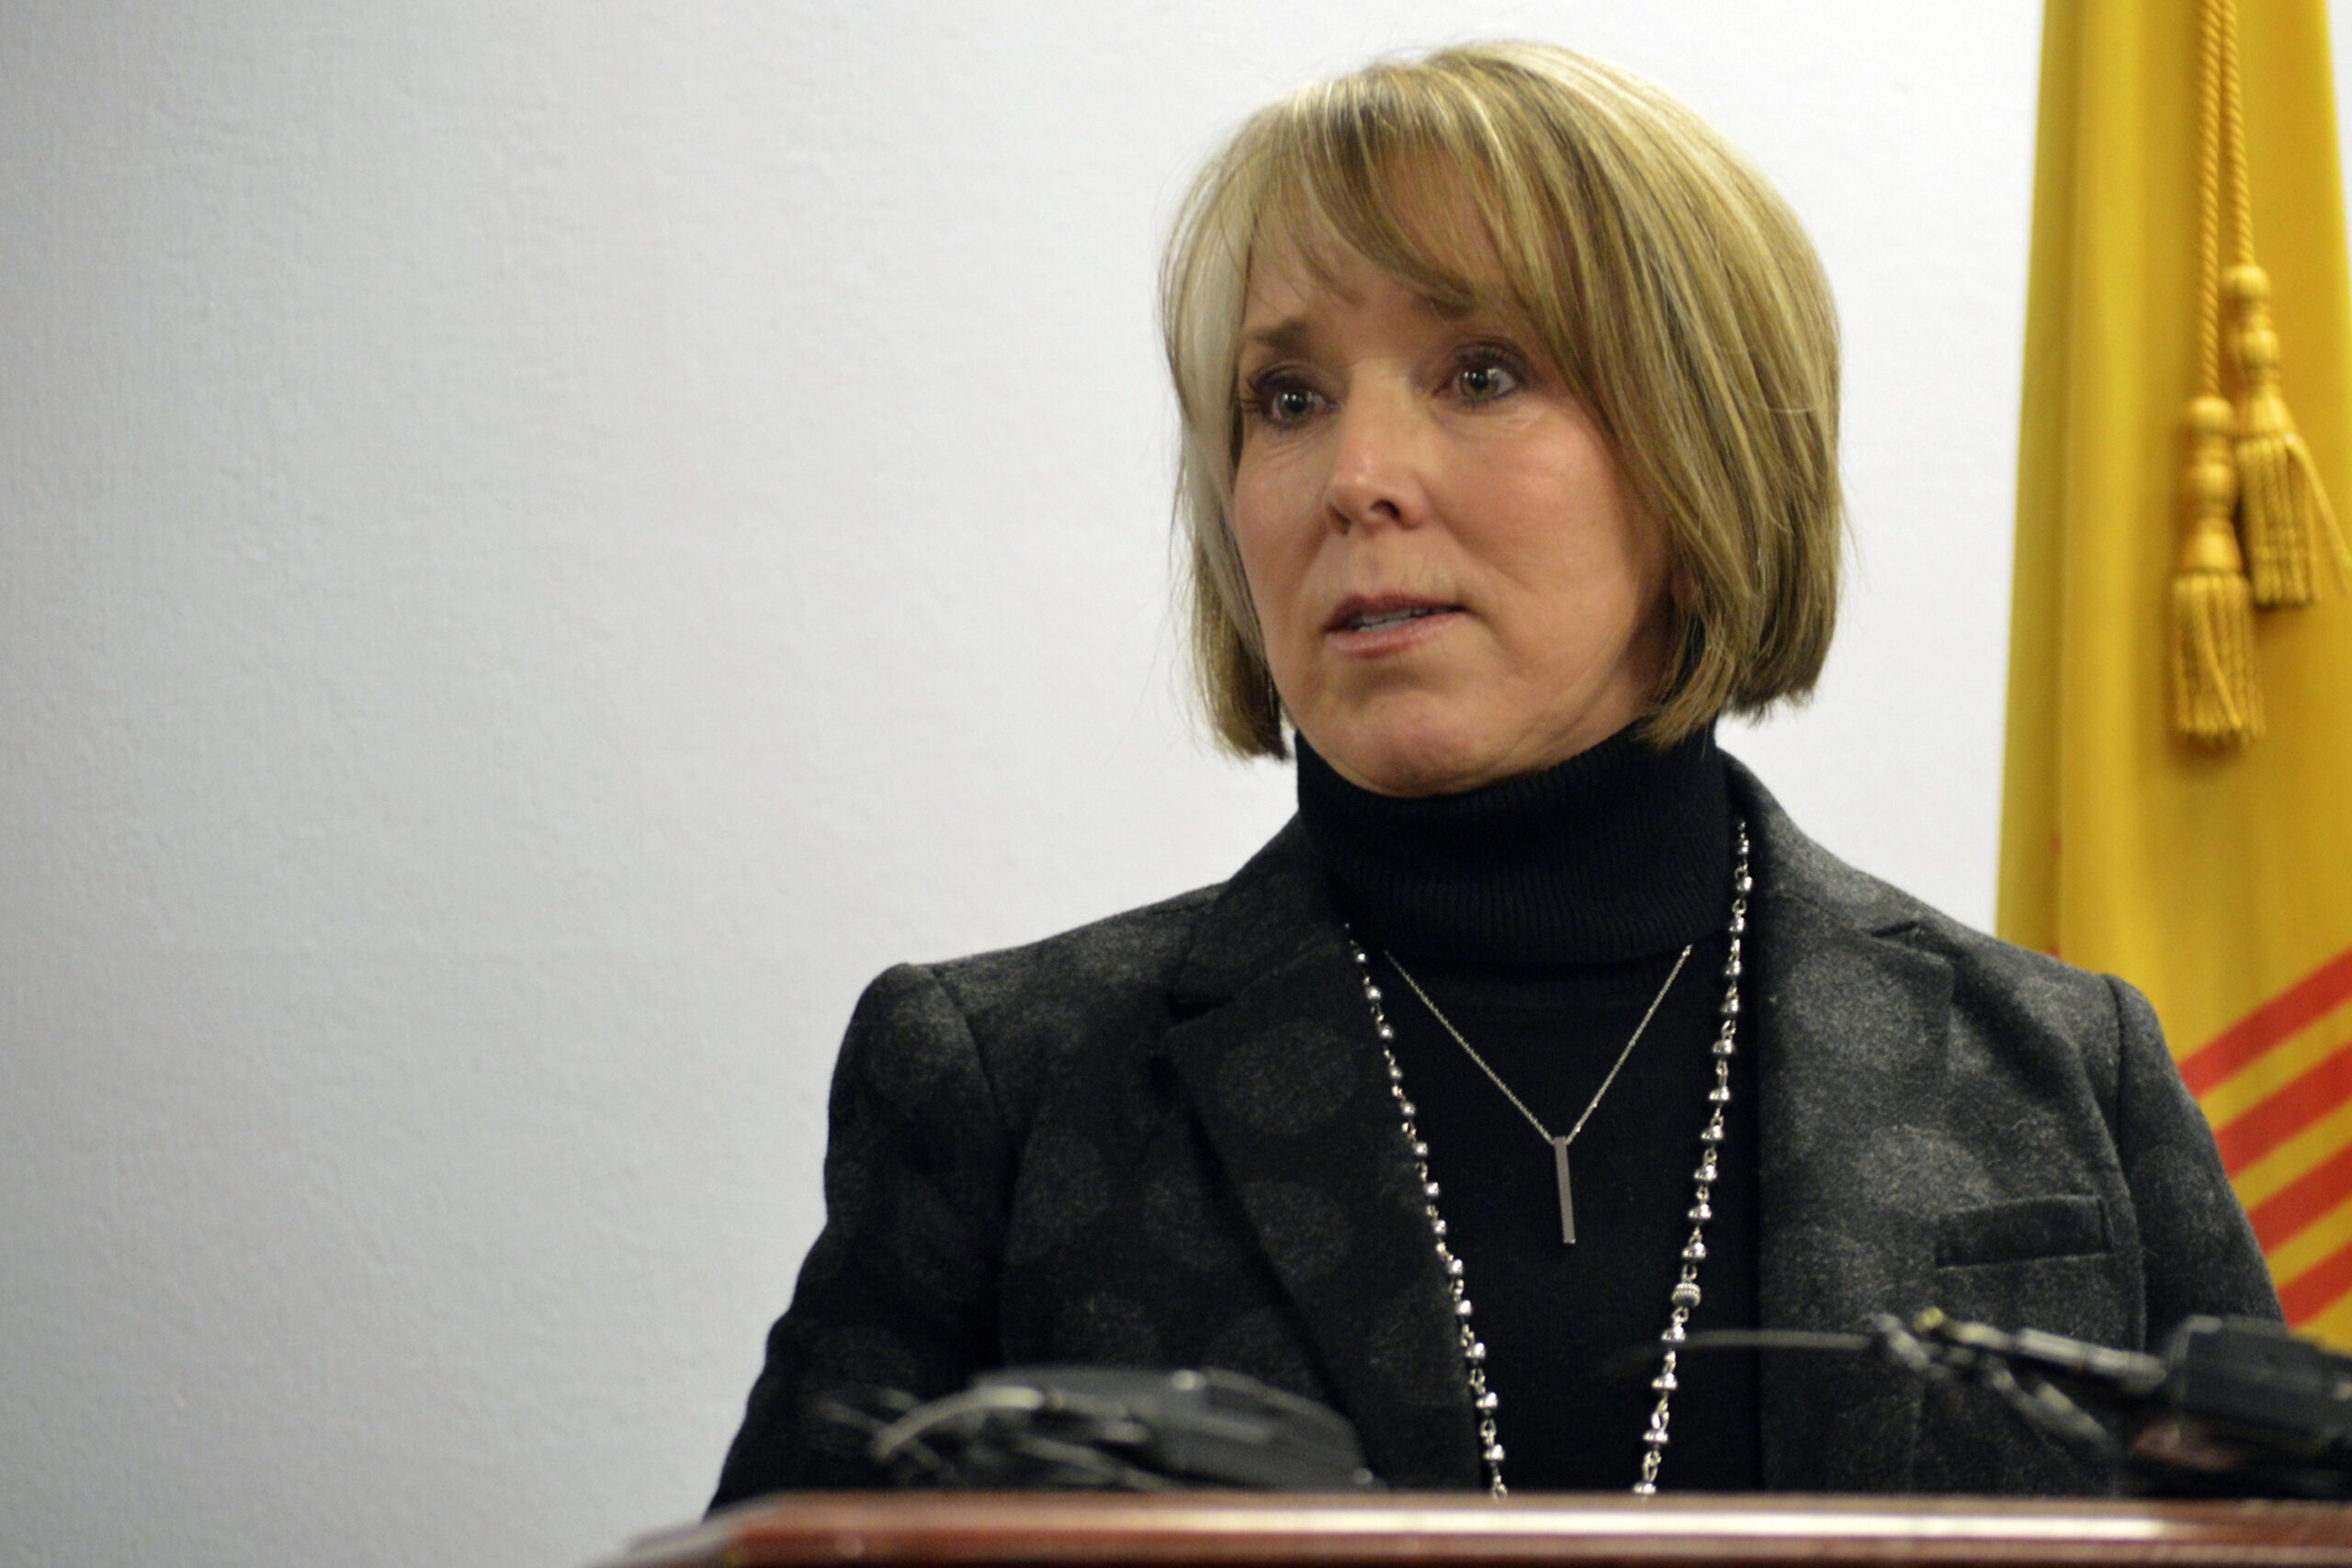 Gov. Lujan Grisham: ‘I will use every tool in my toolbox’ to block nuclear waste storage in New Mexico